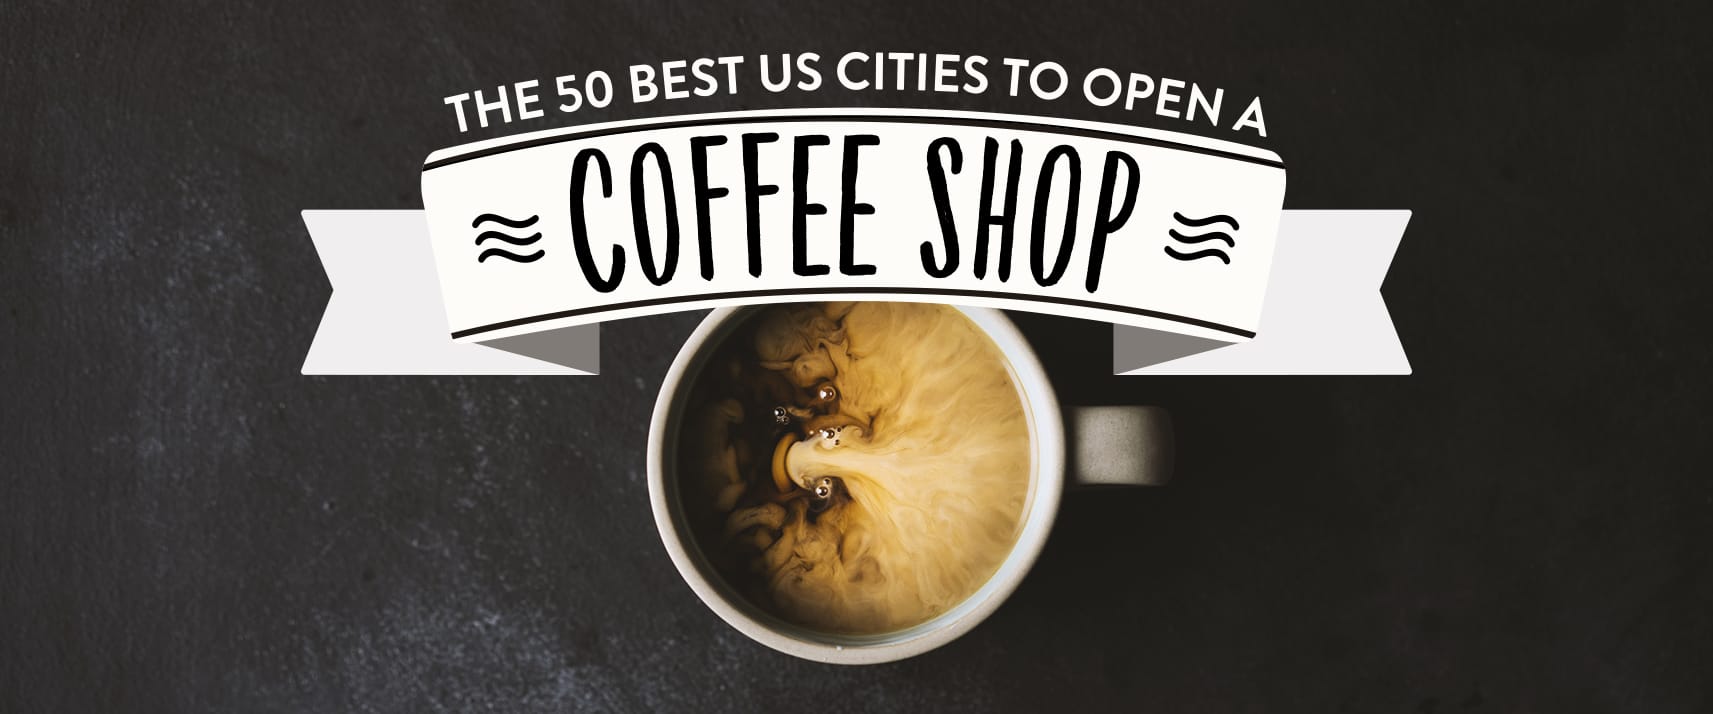 Fifty best US cities to open a coffee shop